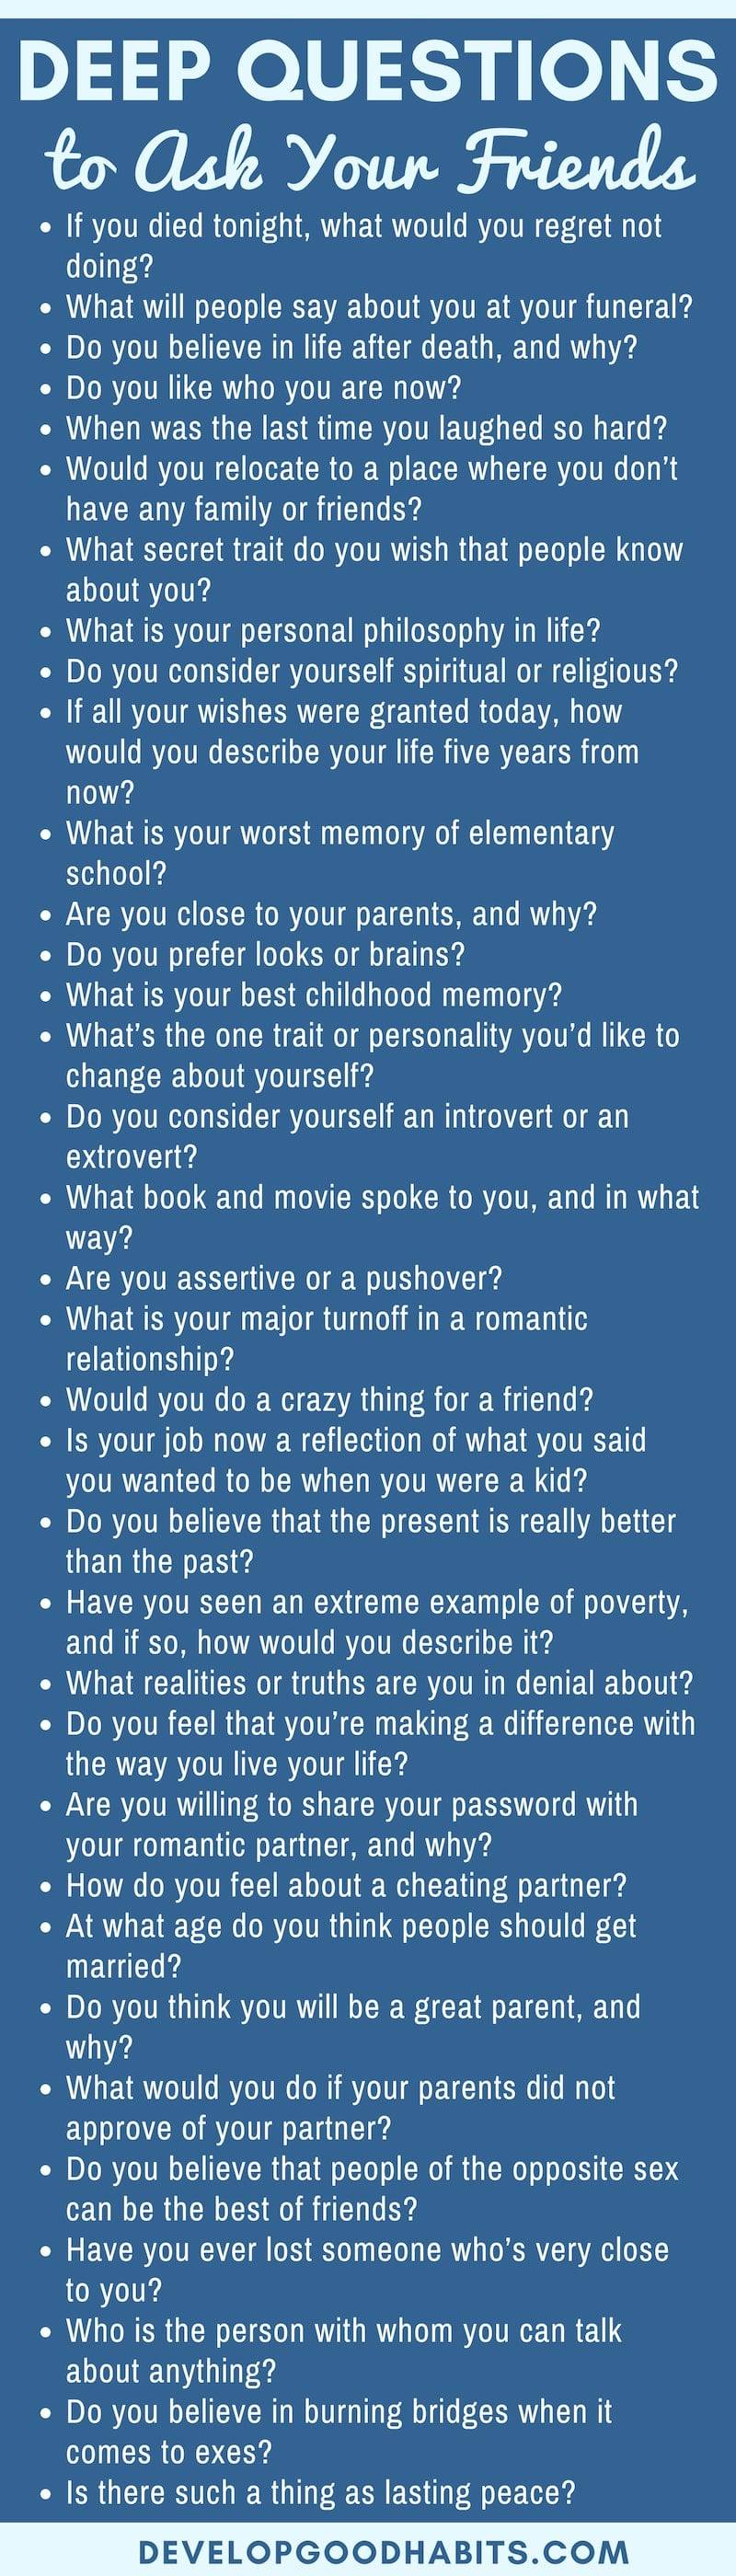 Questions to get to know each other